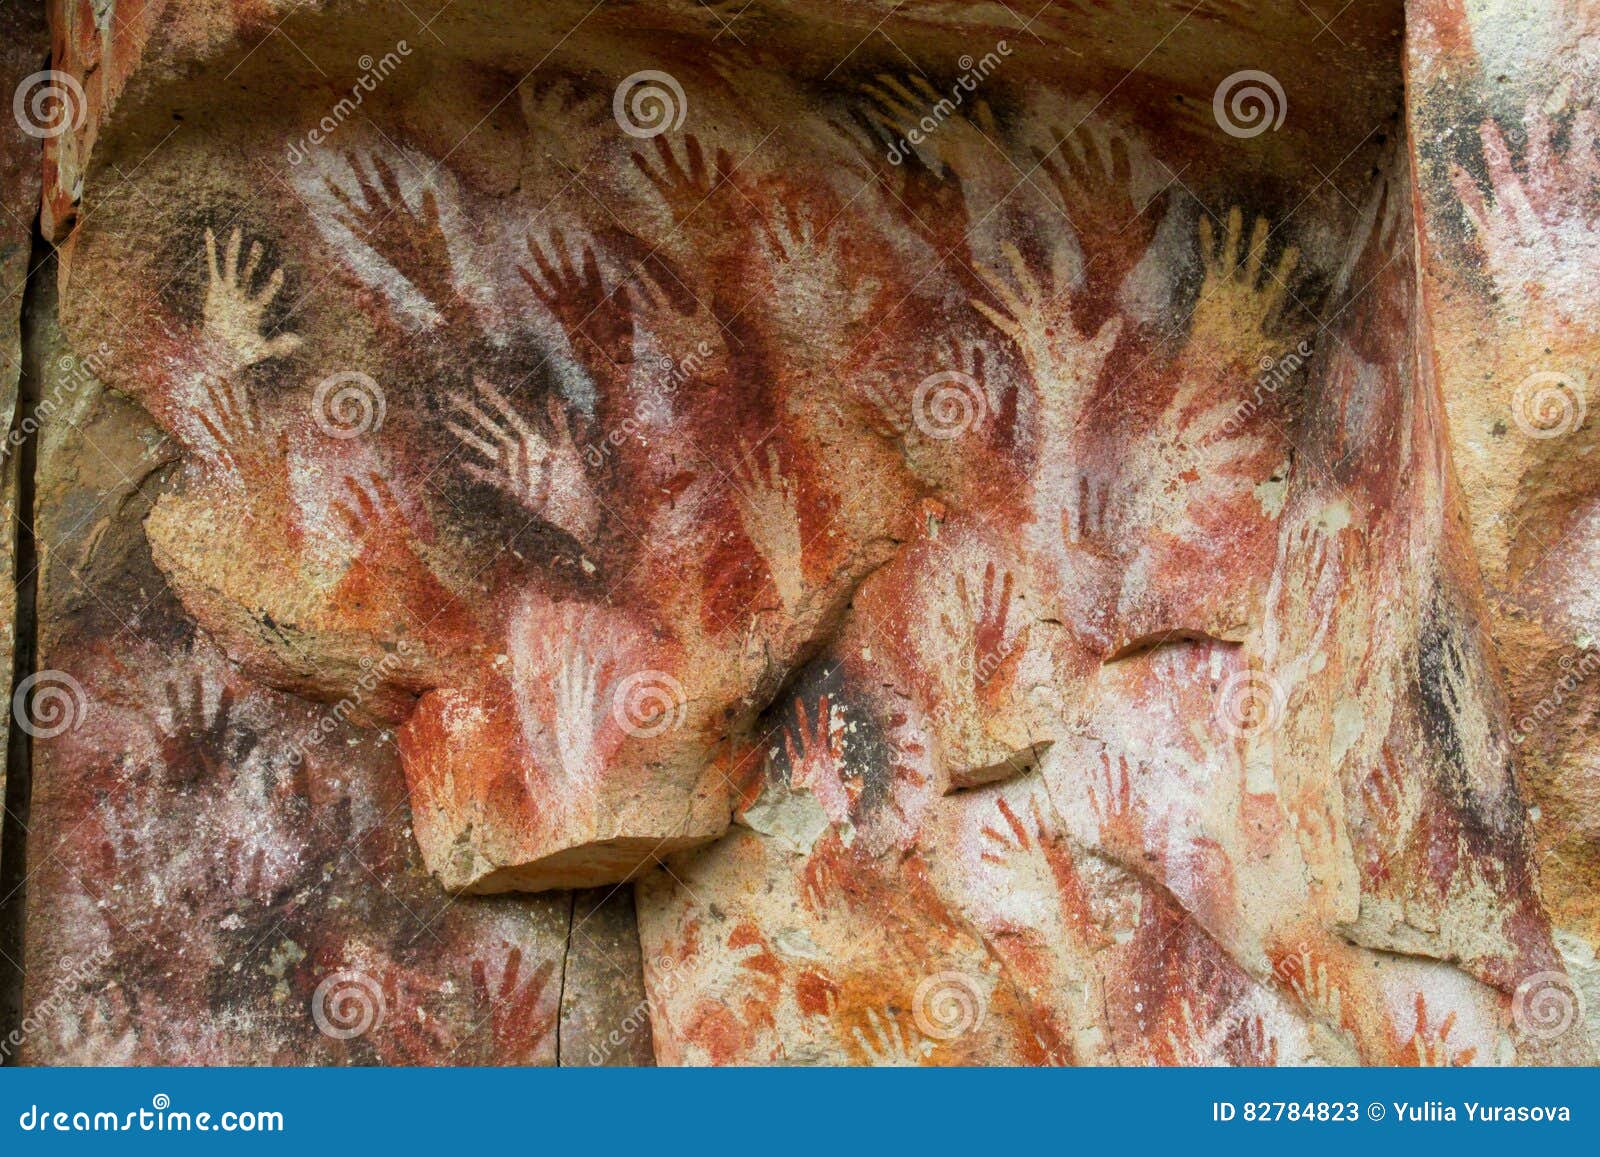 Hand Prints On A Cave Wall Stock Image Image Of Ceiling